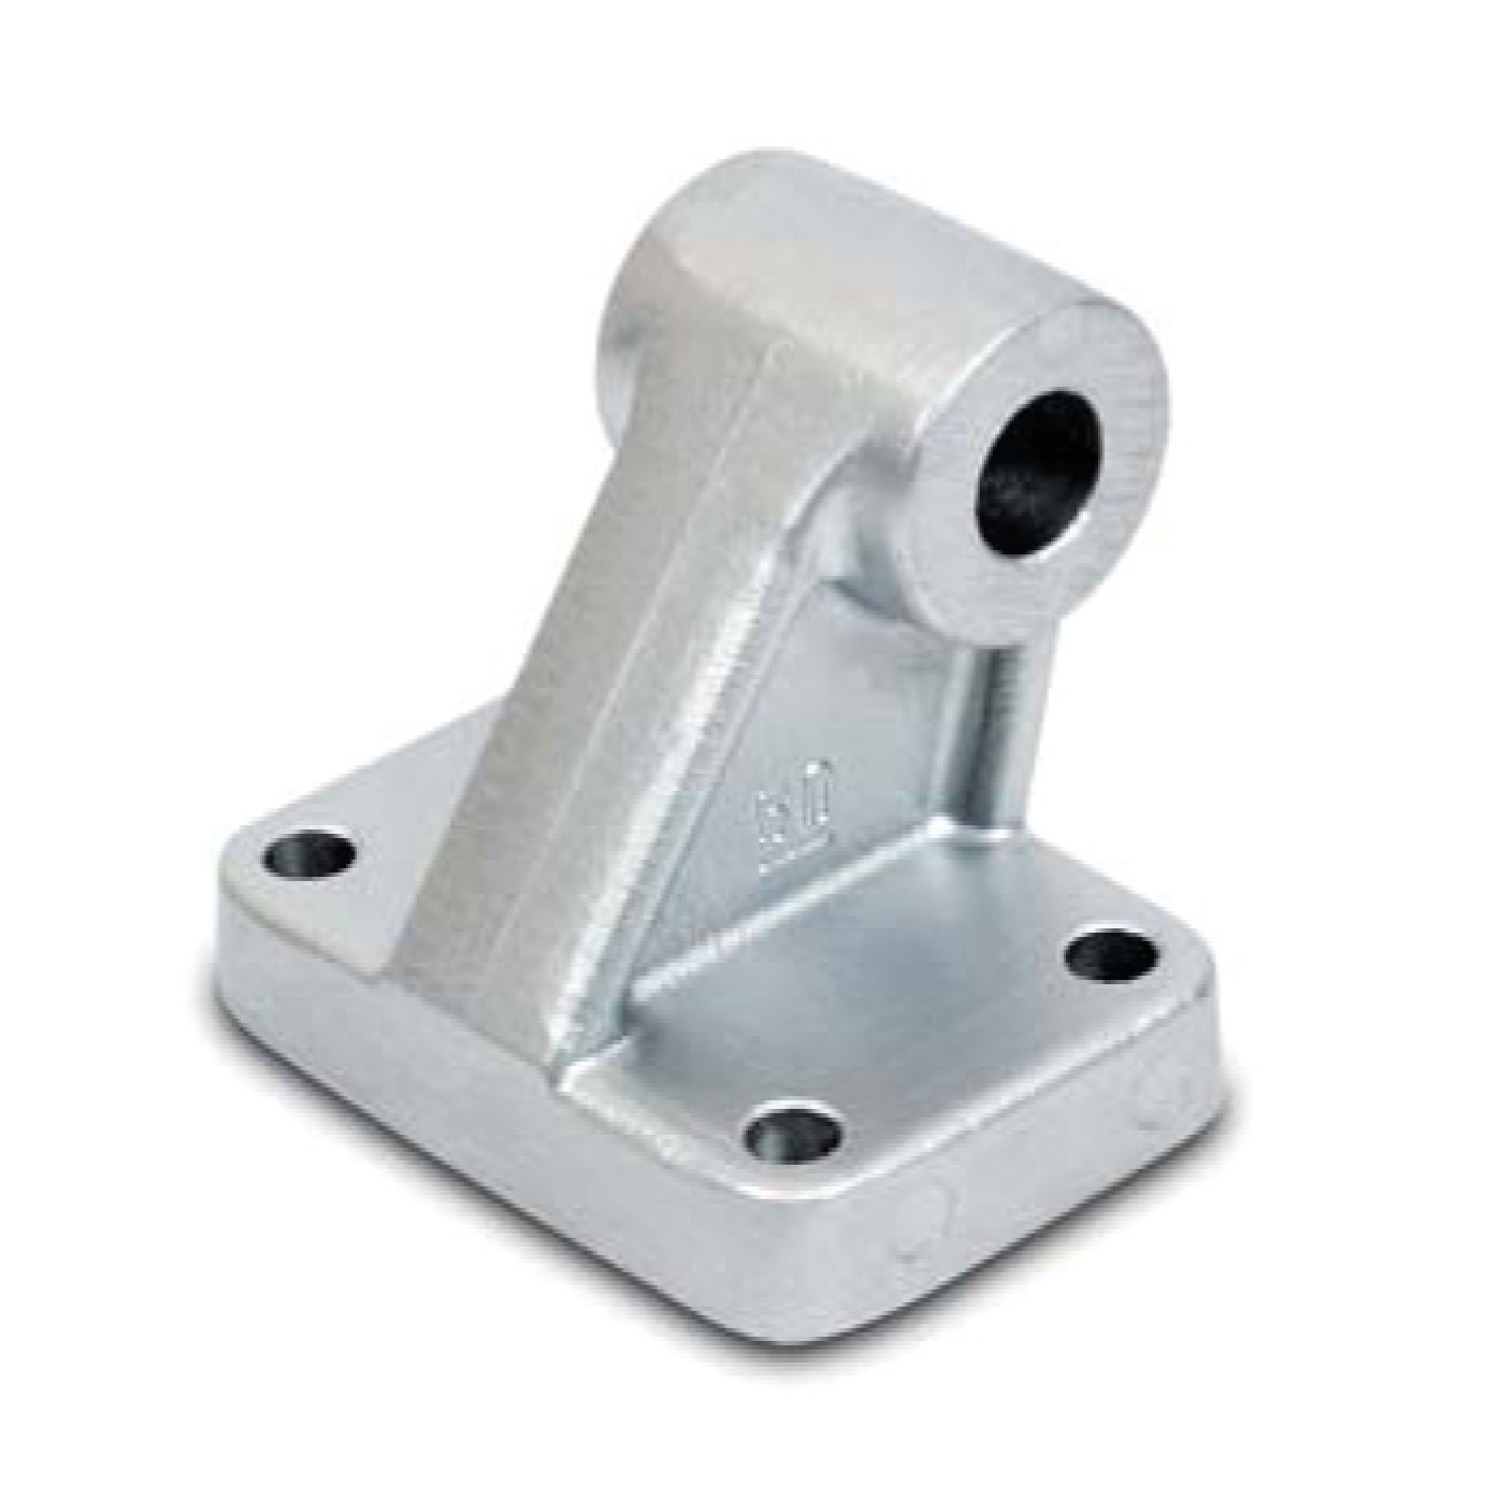 L4802 - Air Cylinder Mounts - ISO Series